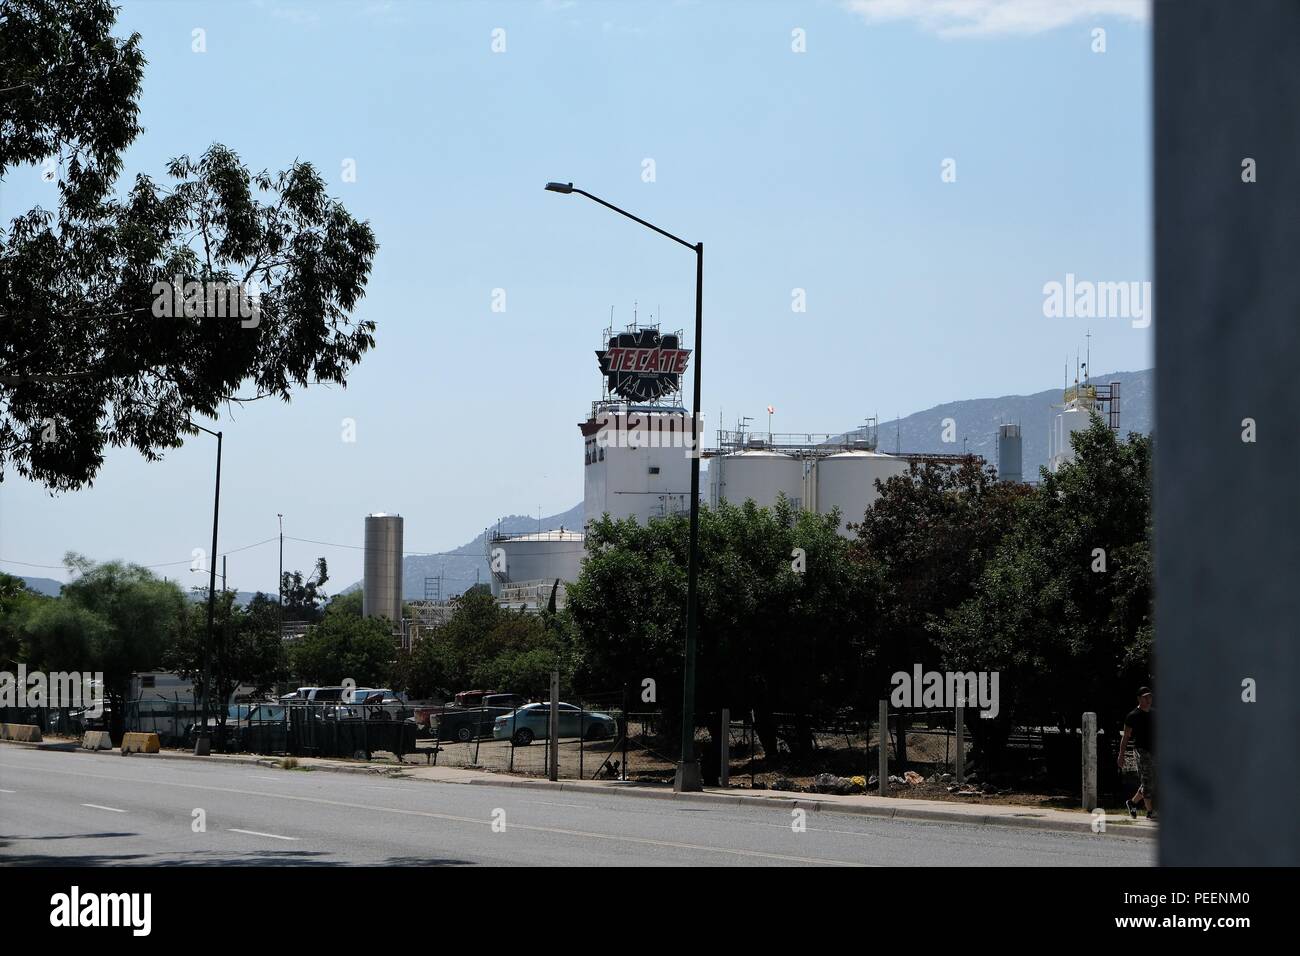 Tecate brewery from a distance in Tecate, Baja California, Mexico. Stock Photo